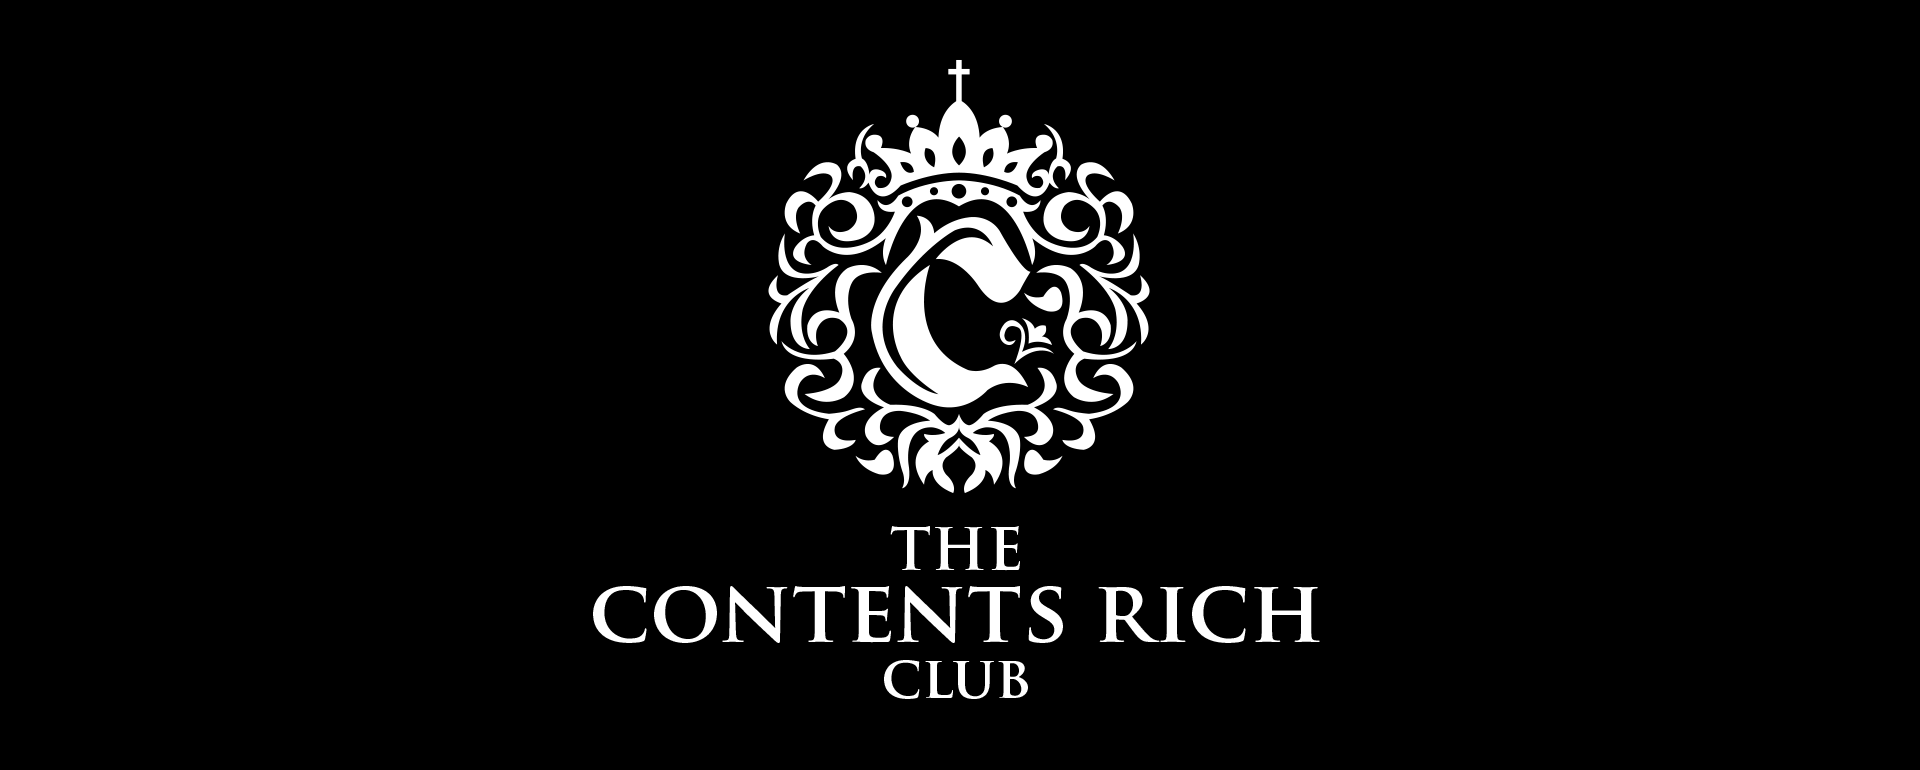 THE CONTENTS RICH CLUB